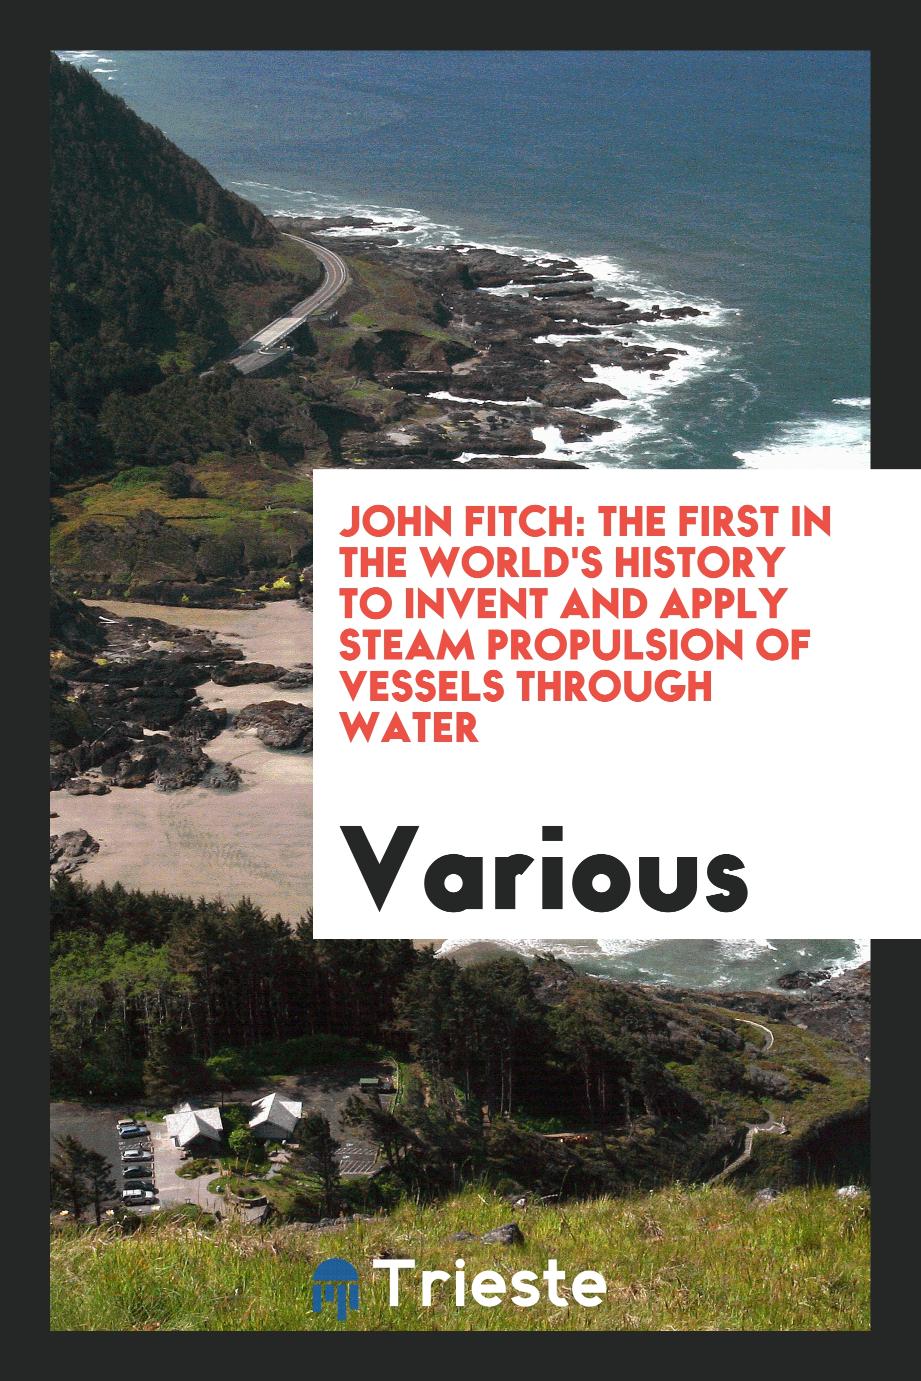 John Fitch: The First in the World's History to Invent and Apply Steam Propulsion of Vessels Through water